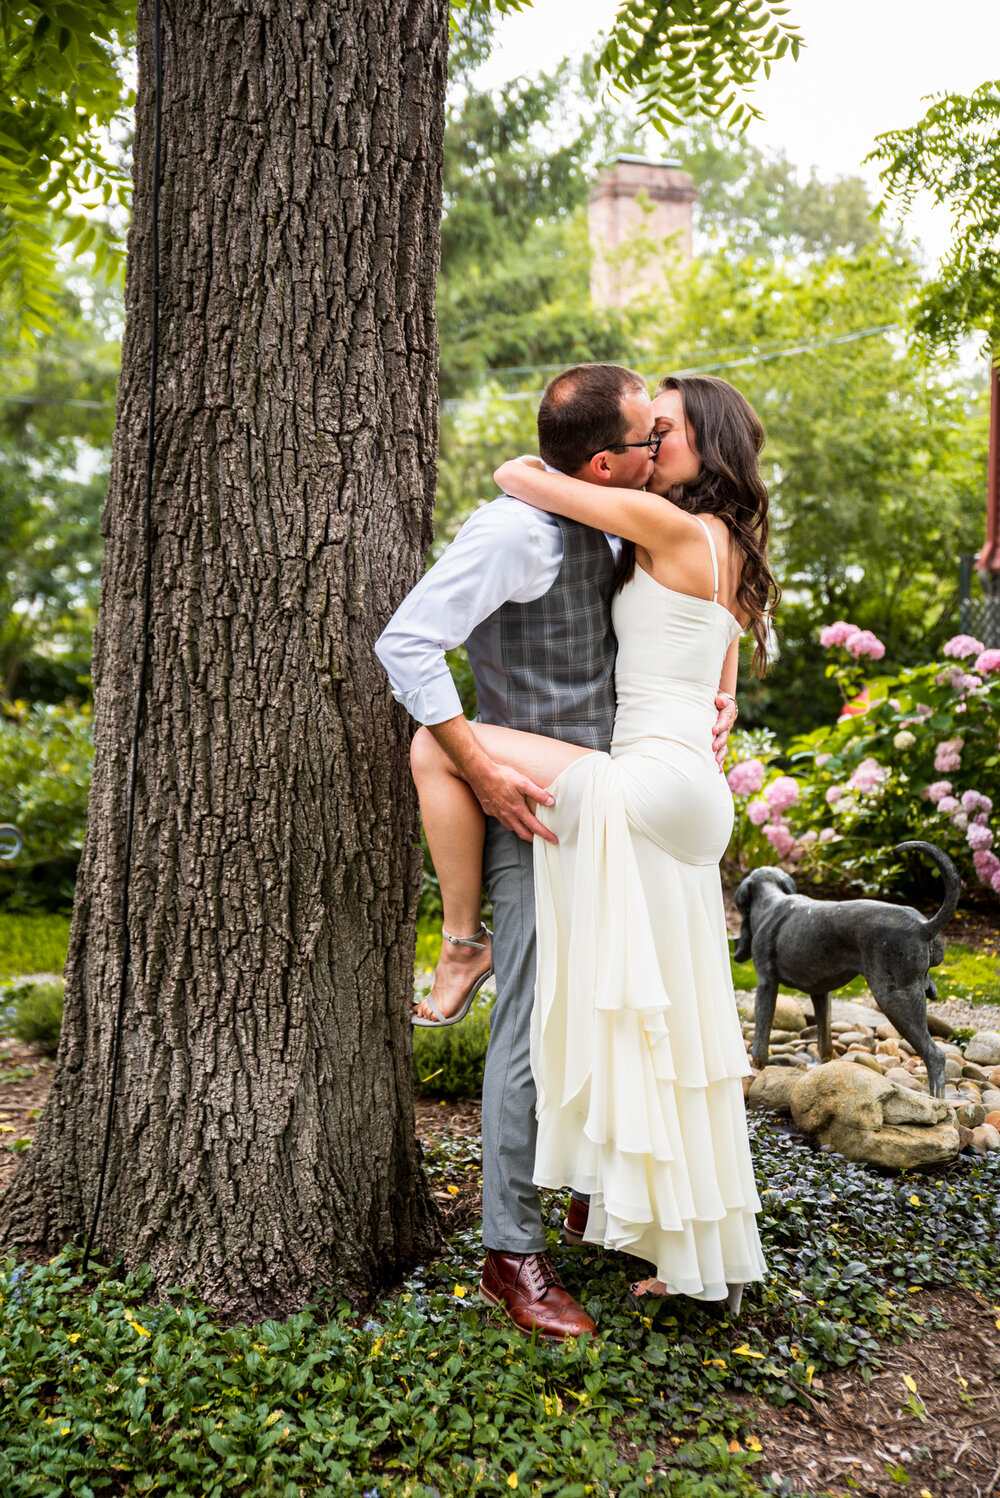 Romantic Kiss between bride and groom in Asheville, NC